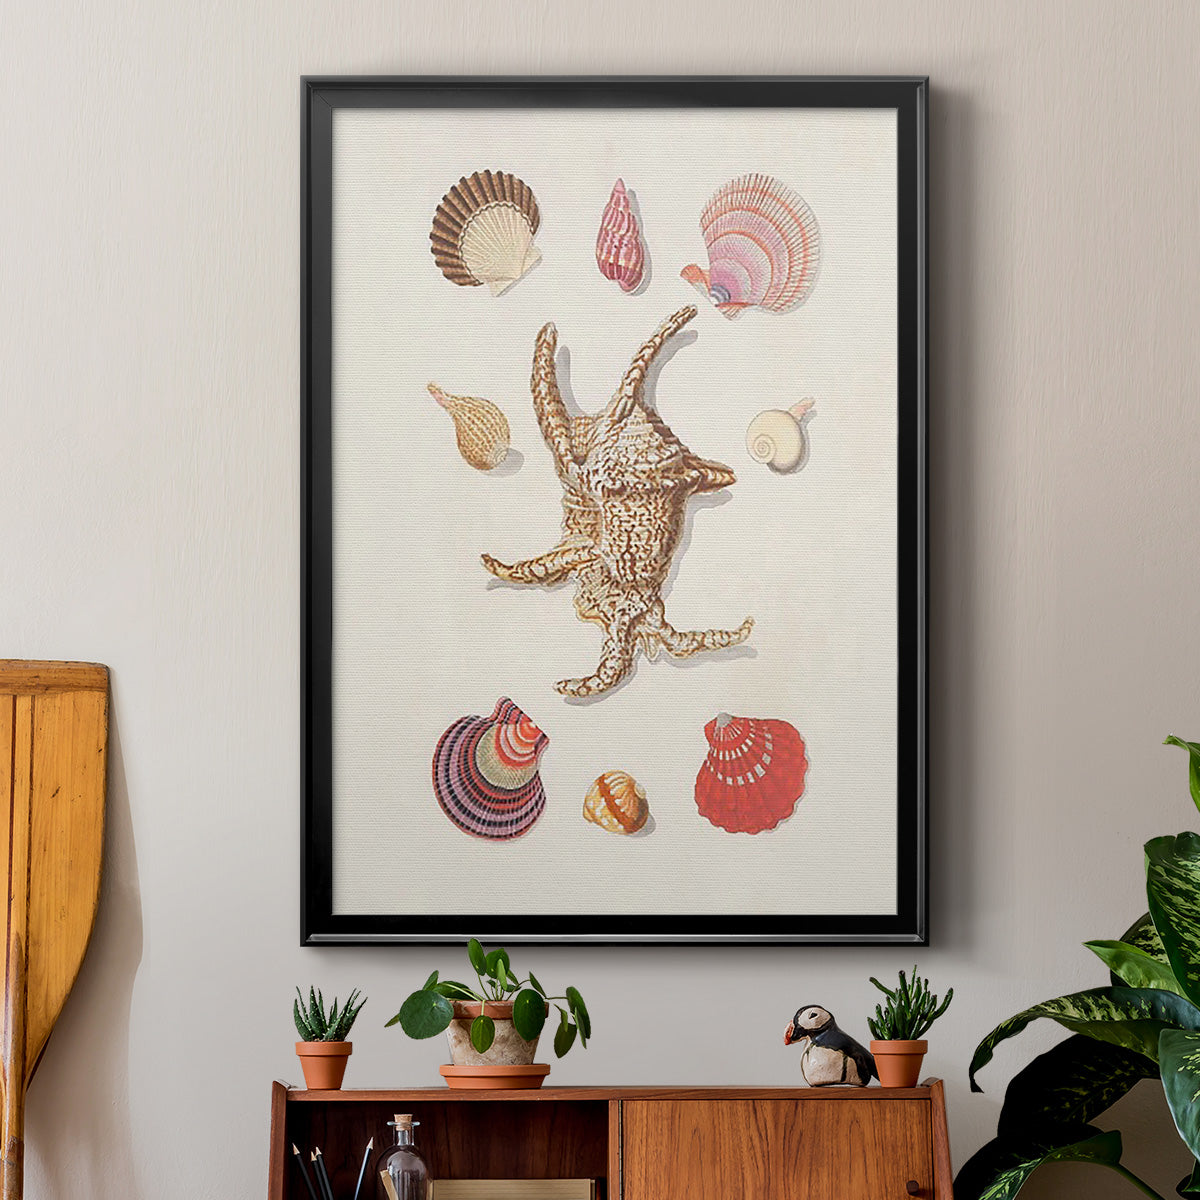 Knorr Shells & Coral II Premium Framed Print - Ready to Hang